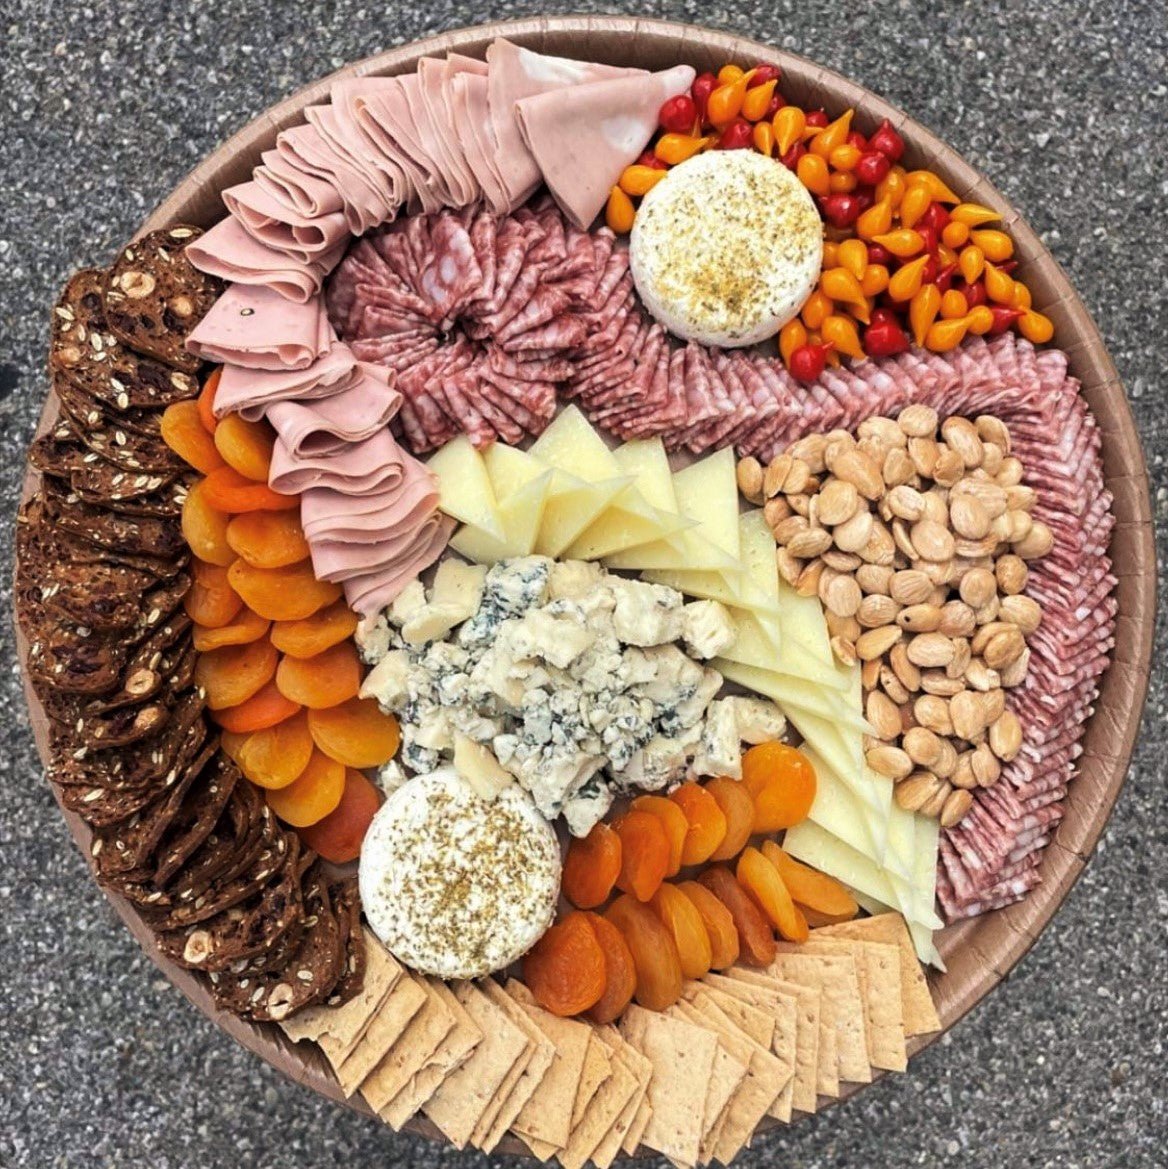 How to Build a Cheese Board - The Virtual Experience - Mongers' Provisions